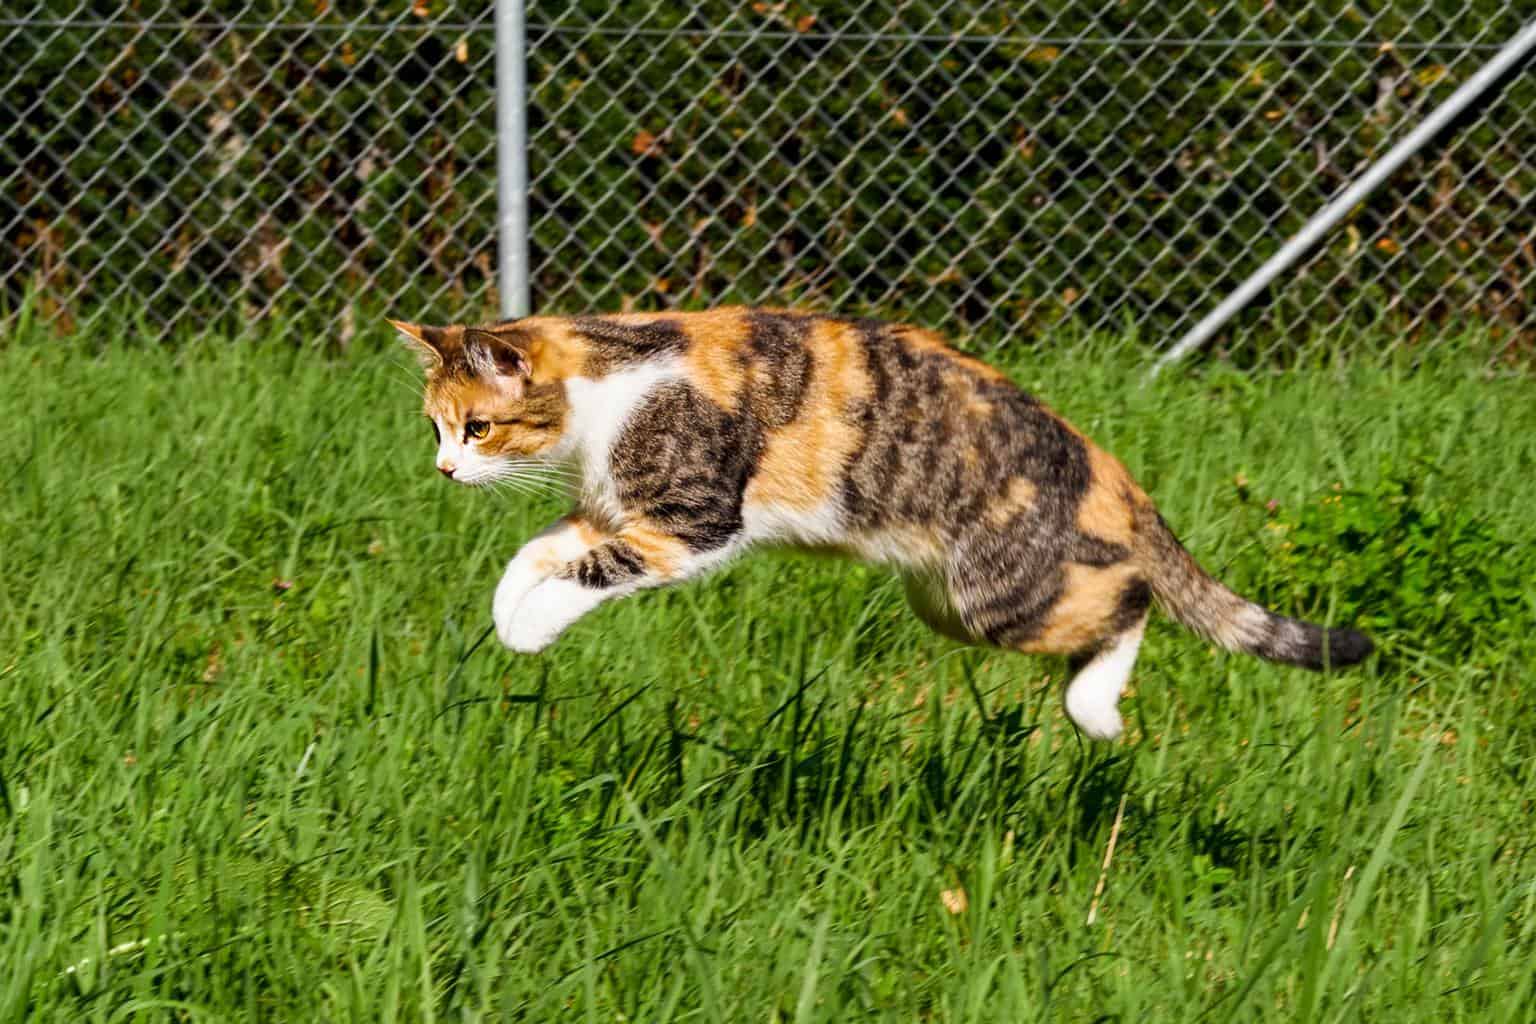 Cat jumping on grass during daytime